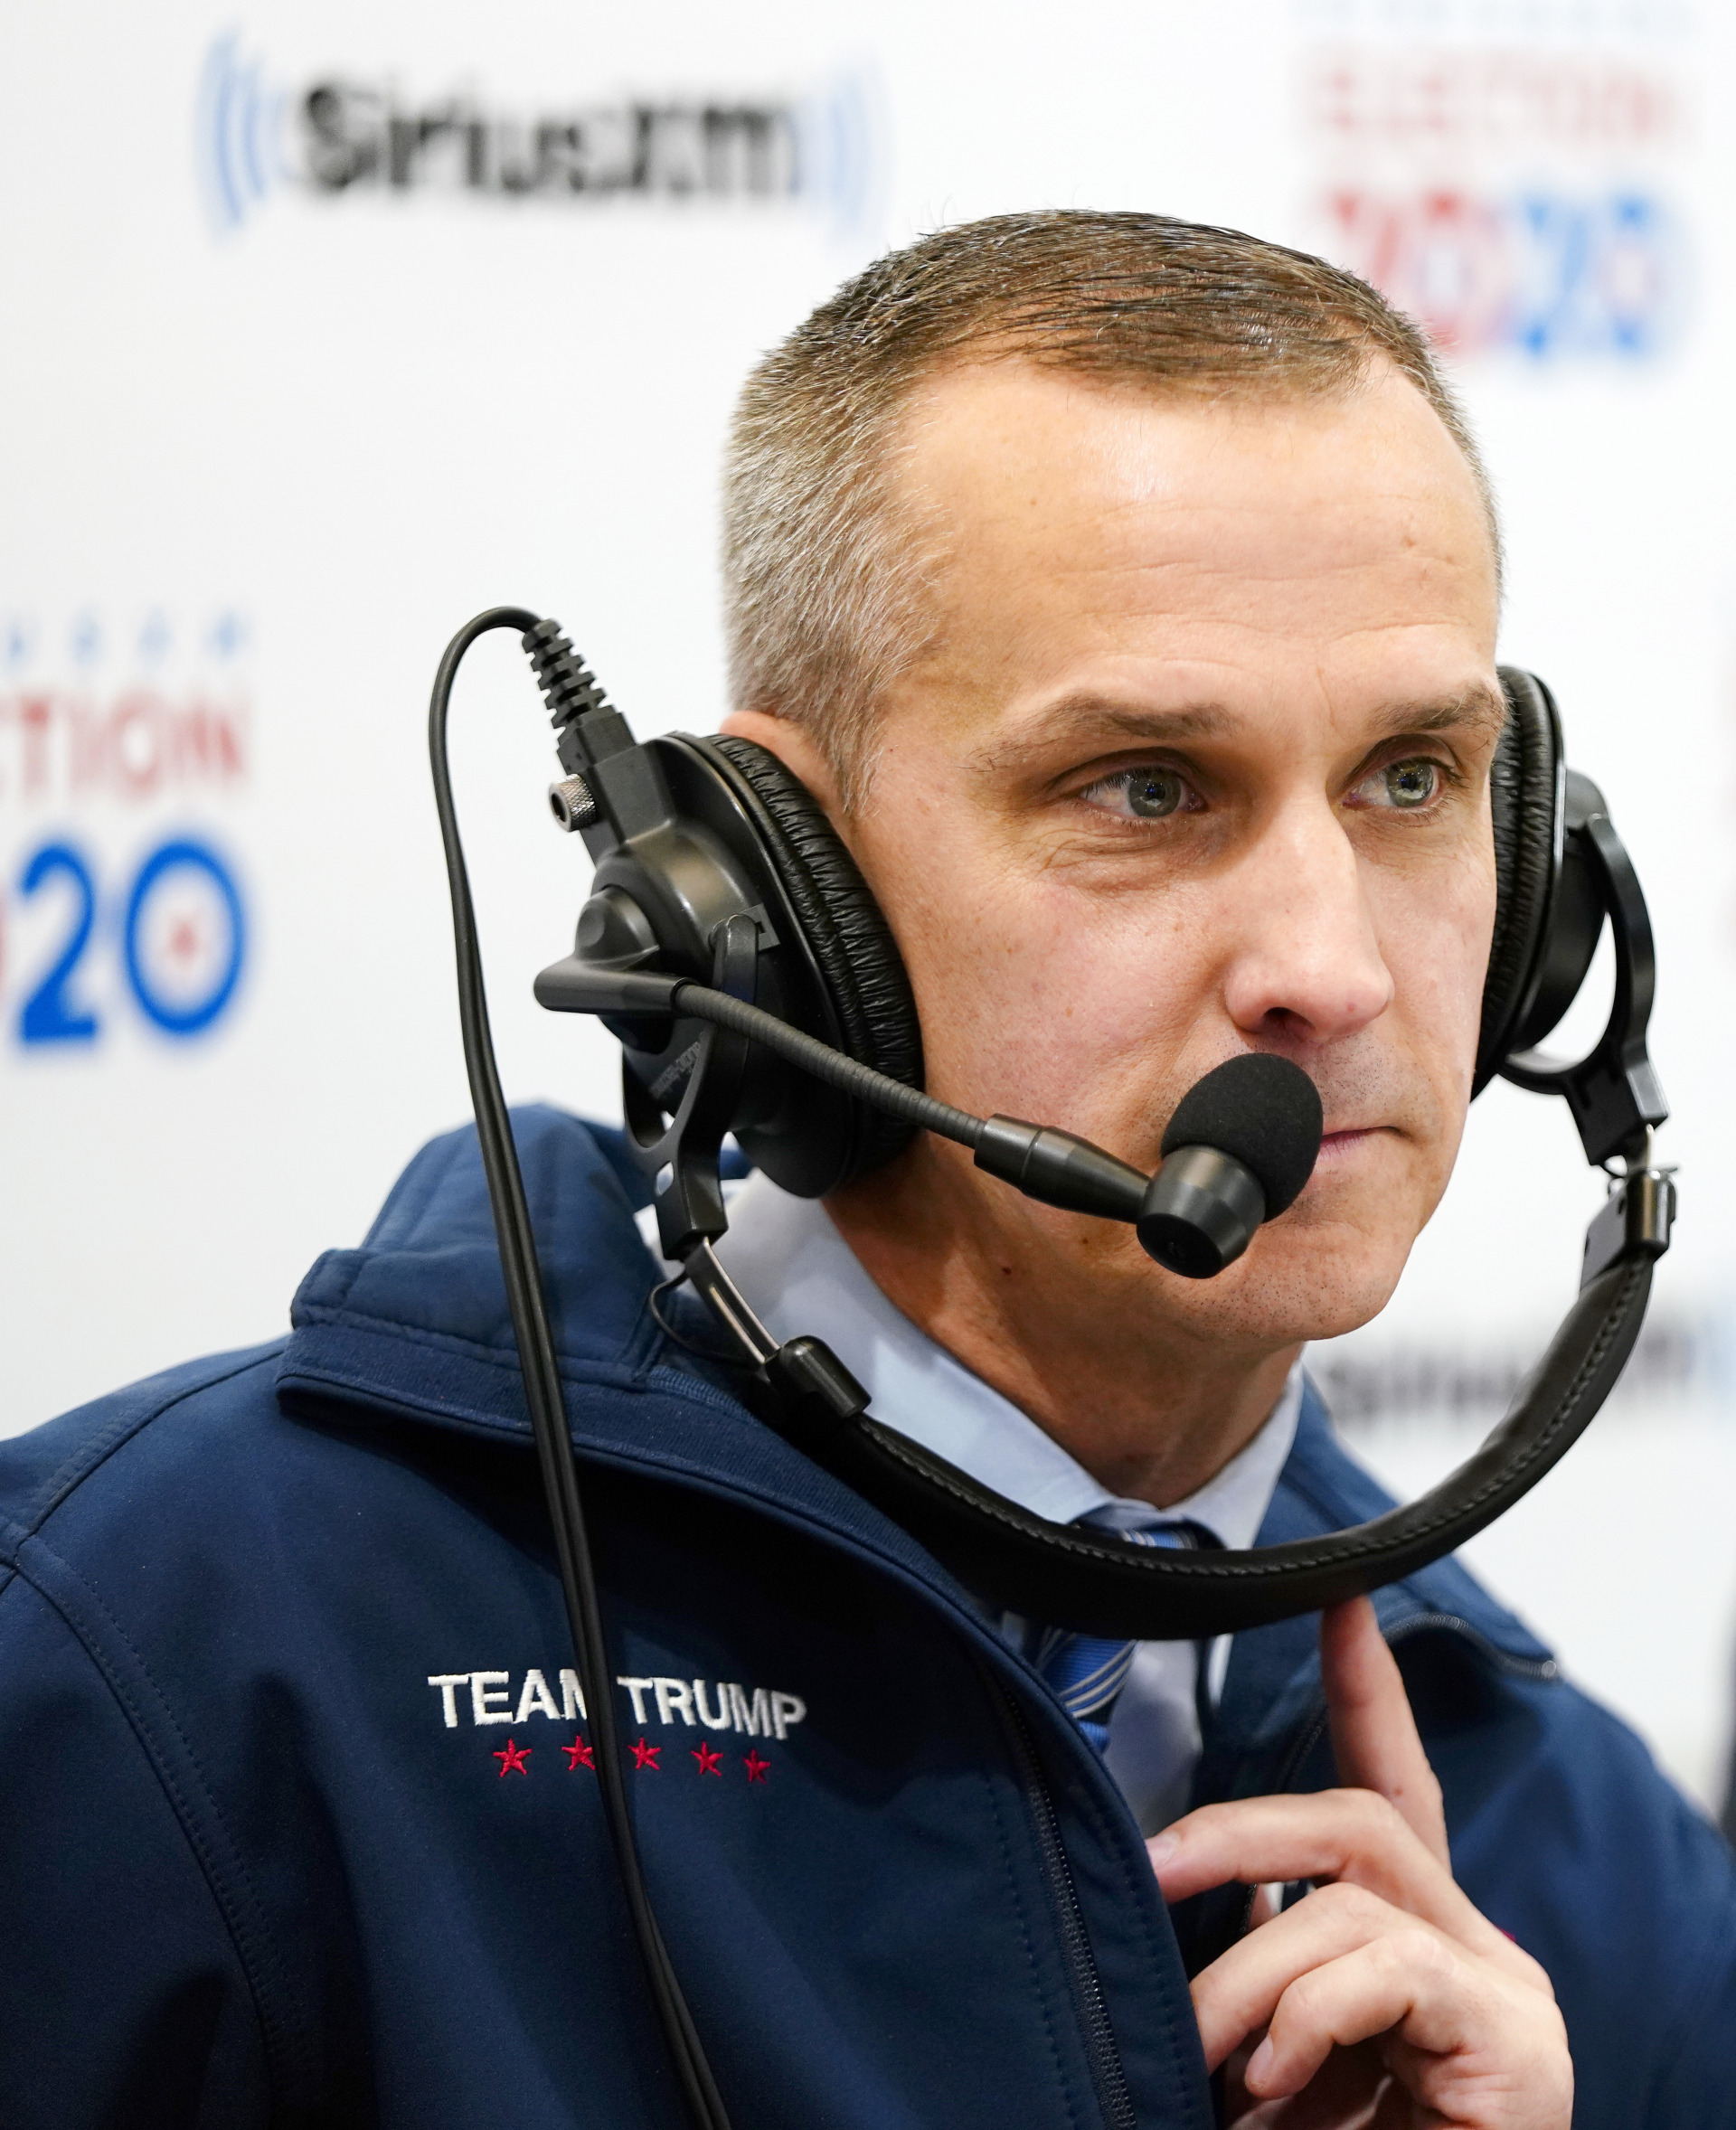 Senior adviser to Trump 2020, Corey Lewandowski looks on while talking with Sirius XM P.O.T.U.S host Tim Farley and David Bossie in the Coolidge Room at the DoubleTree by Hilton on February 11, 2020 in Manchester, New Hampshire. (Photo by Omar Rawlings/Getty Images for SiriusXM)